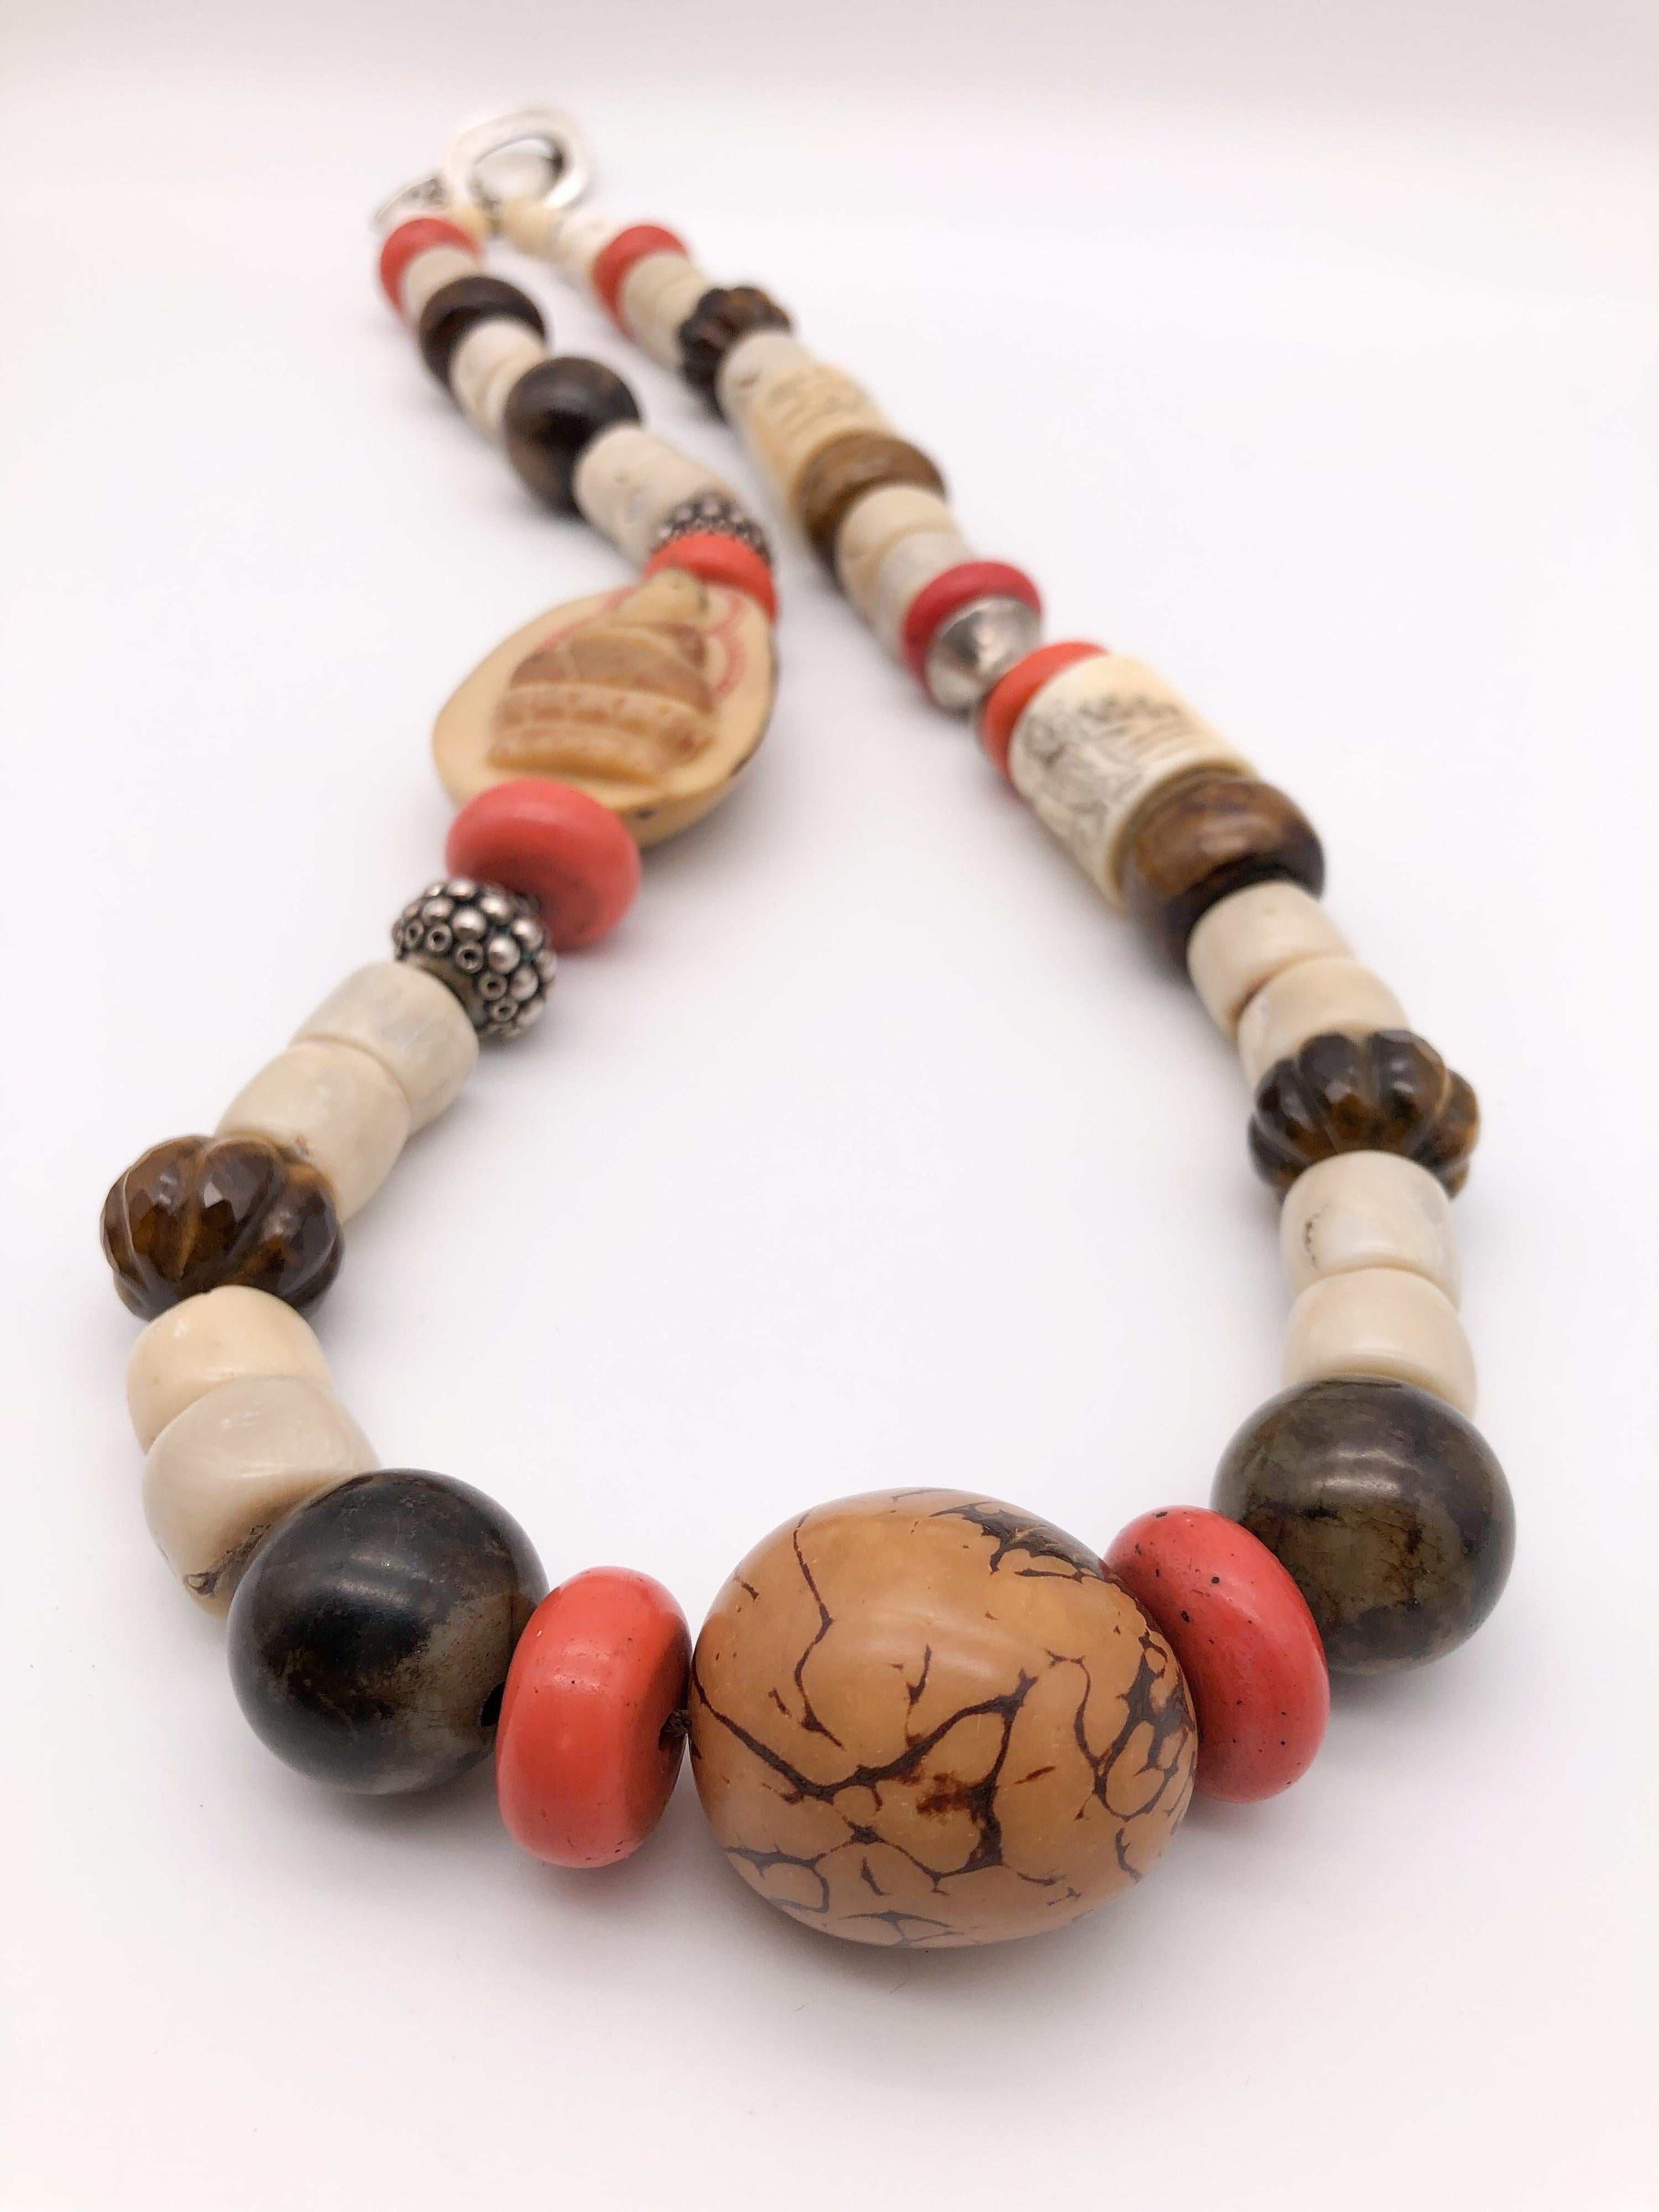 A.Jeschel Colorful Ethnic Tibetan beads and Carved Buddha necklace For Sale 4